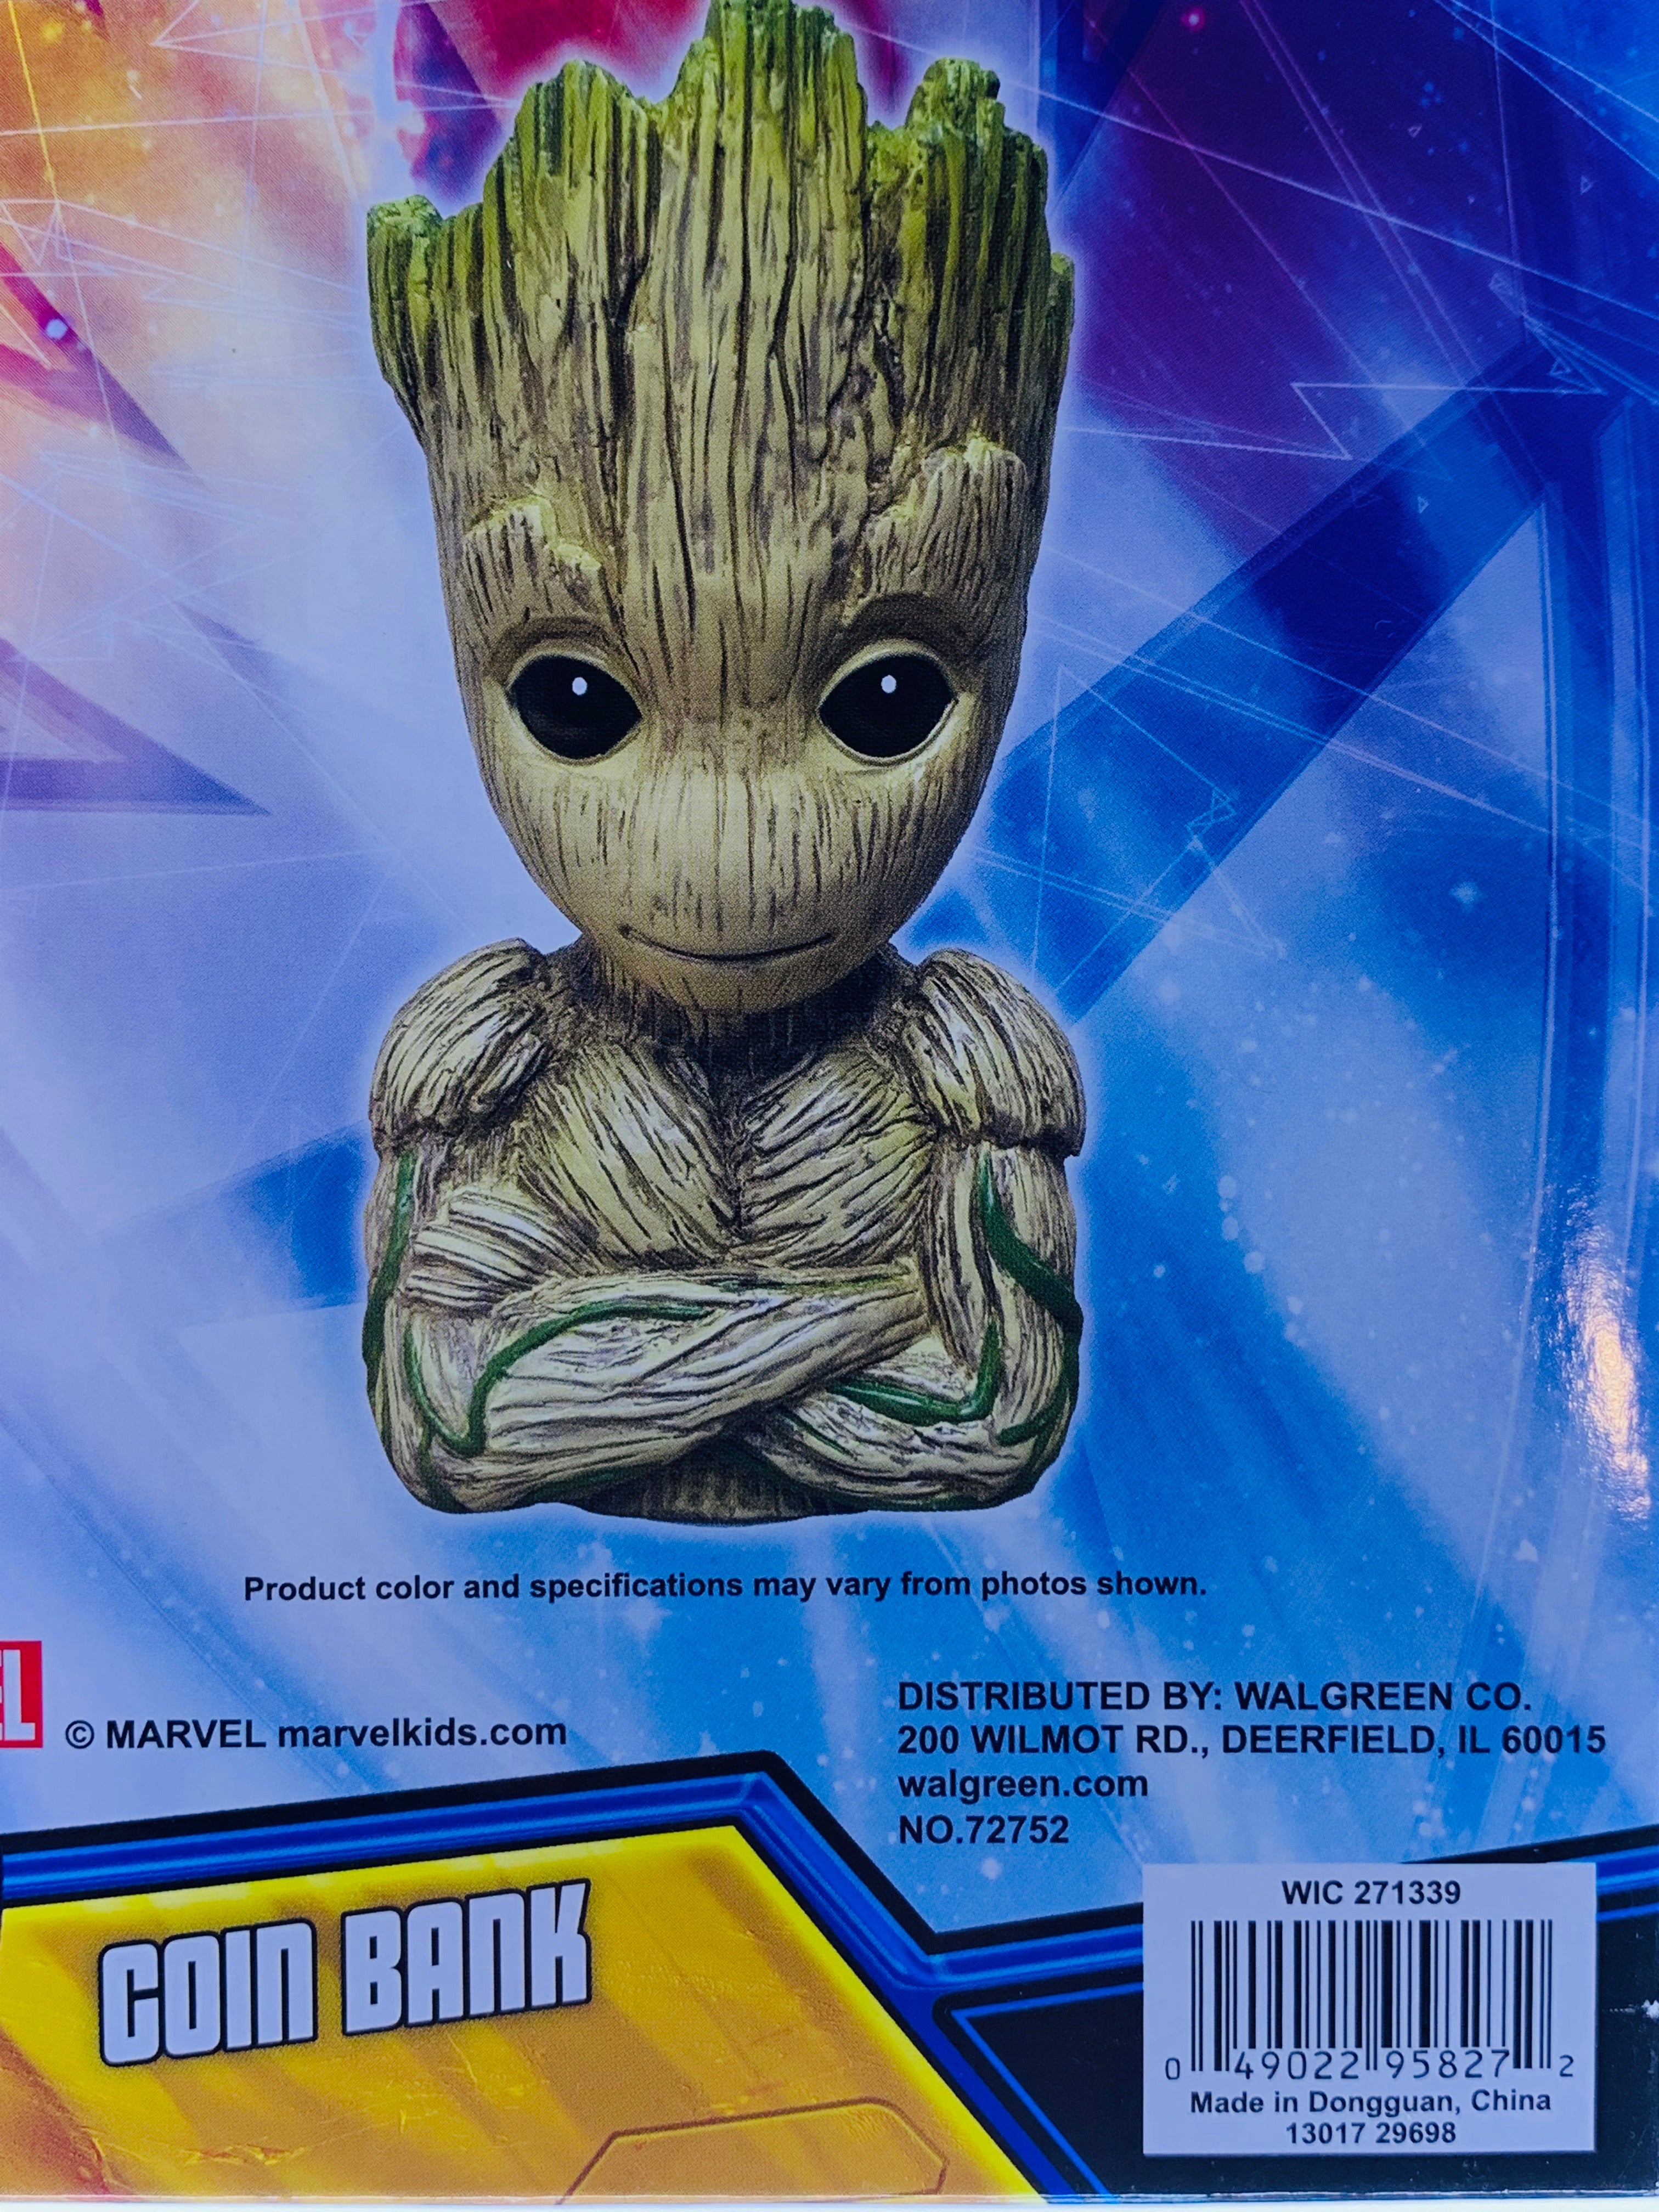 Marvel Guardians Of The Galaxy Vol 2 Groot Coin Bank